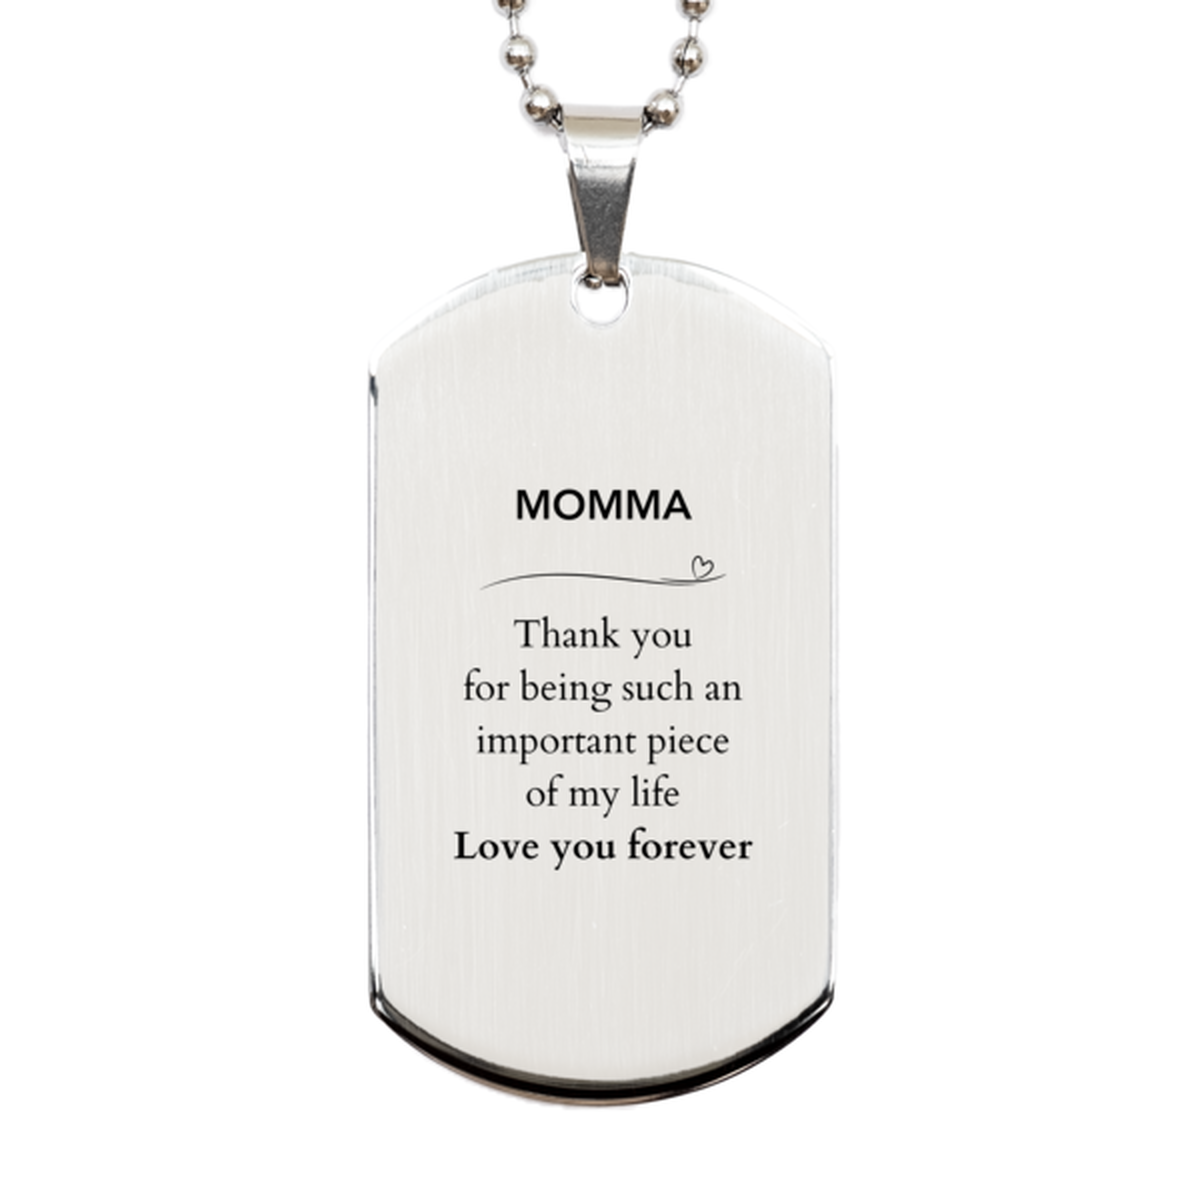 Appropriate Momma Silver Dog Tag Epic Birthday Gifts for Momma Thank you for being such an important piece of my life Momma Christmas Mothers Fathers Day